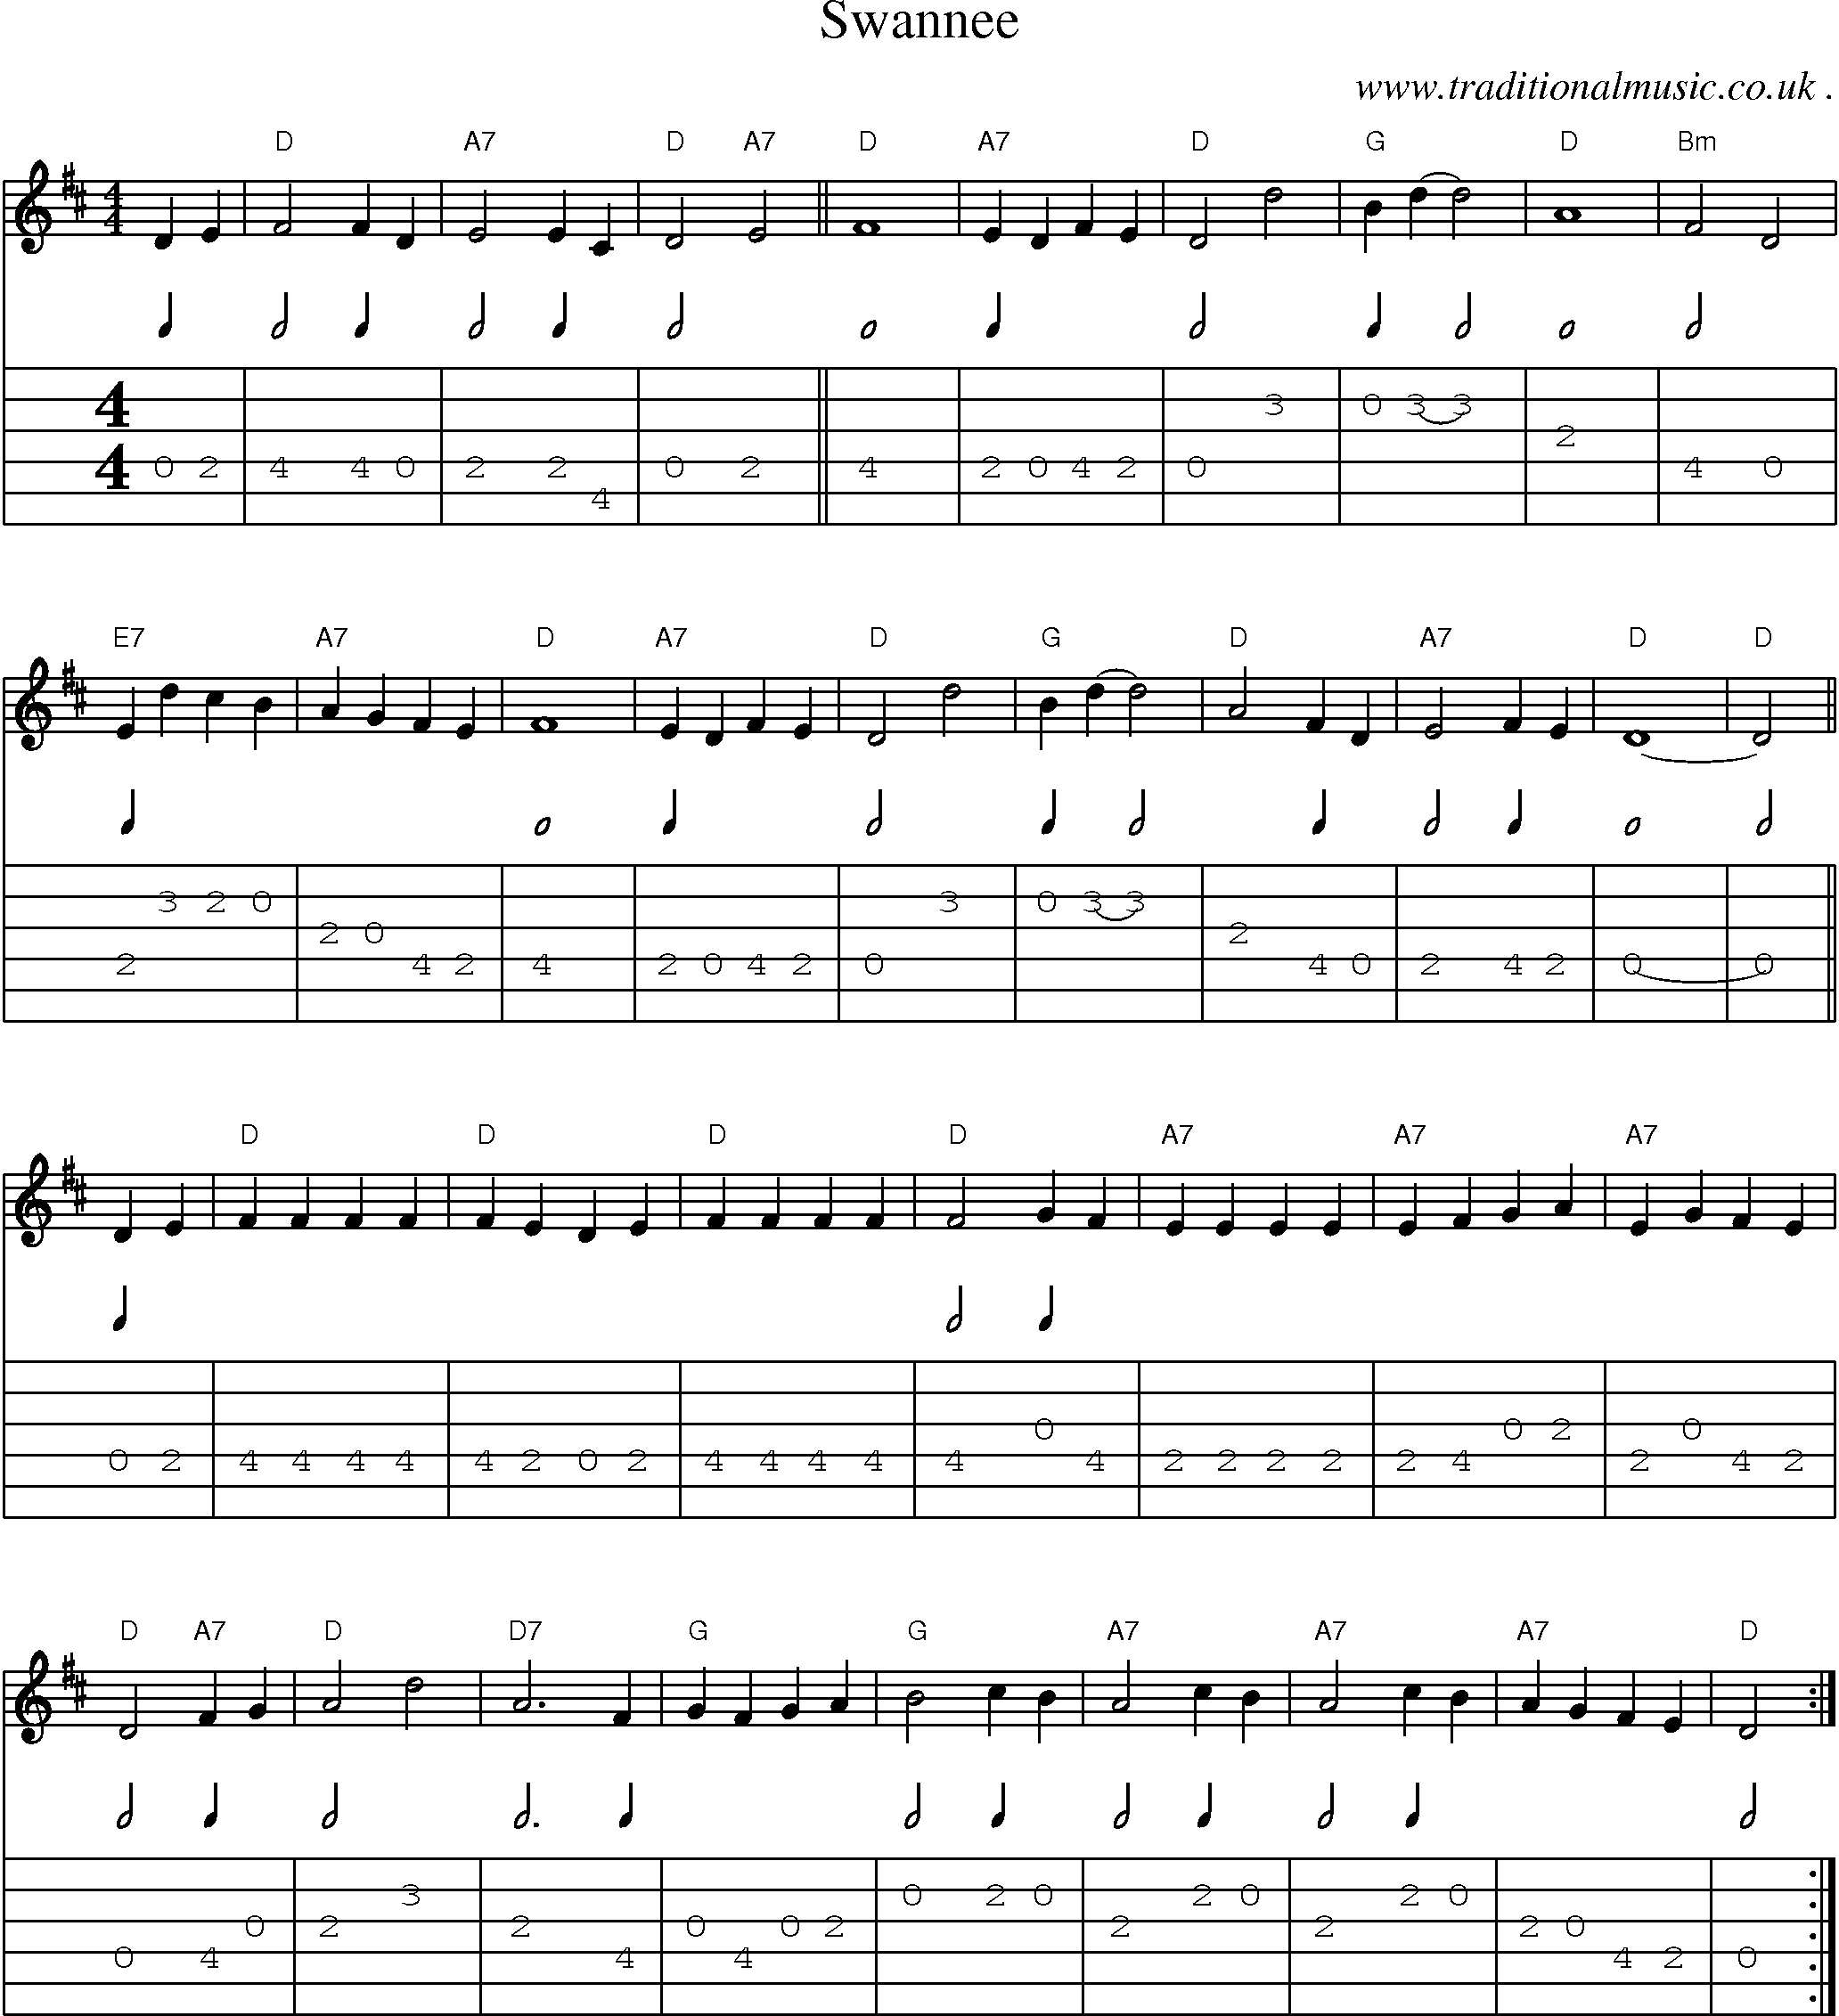 Sheet-Music and Guitar Tabs for Swannee